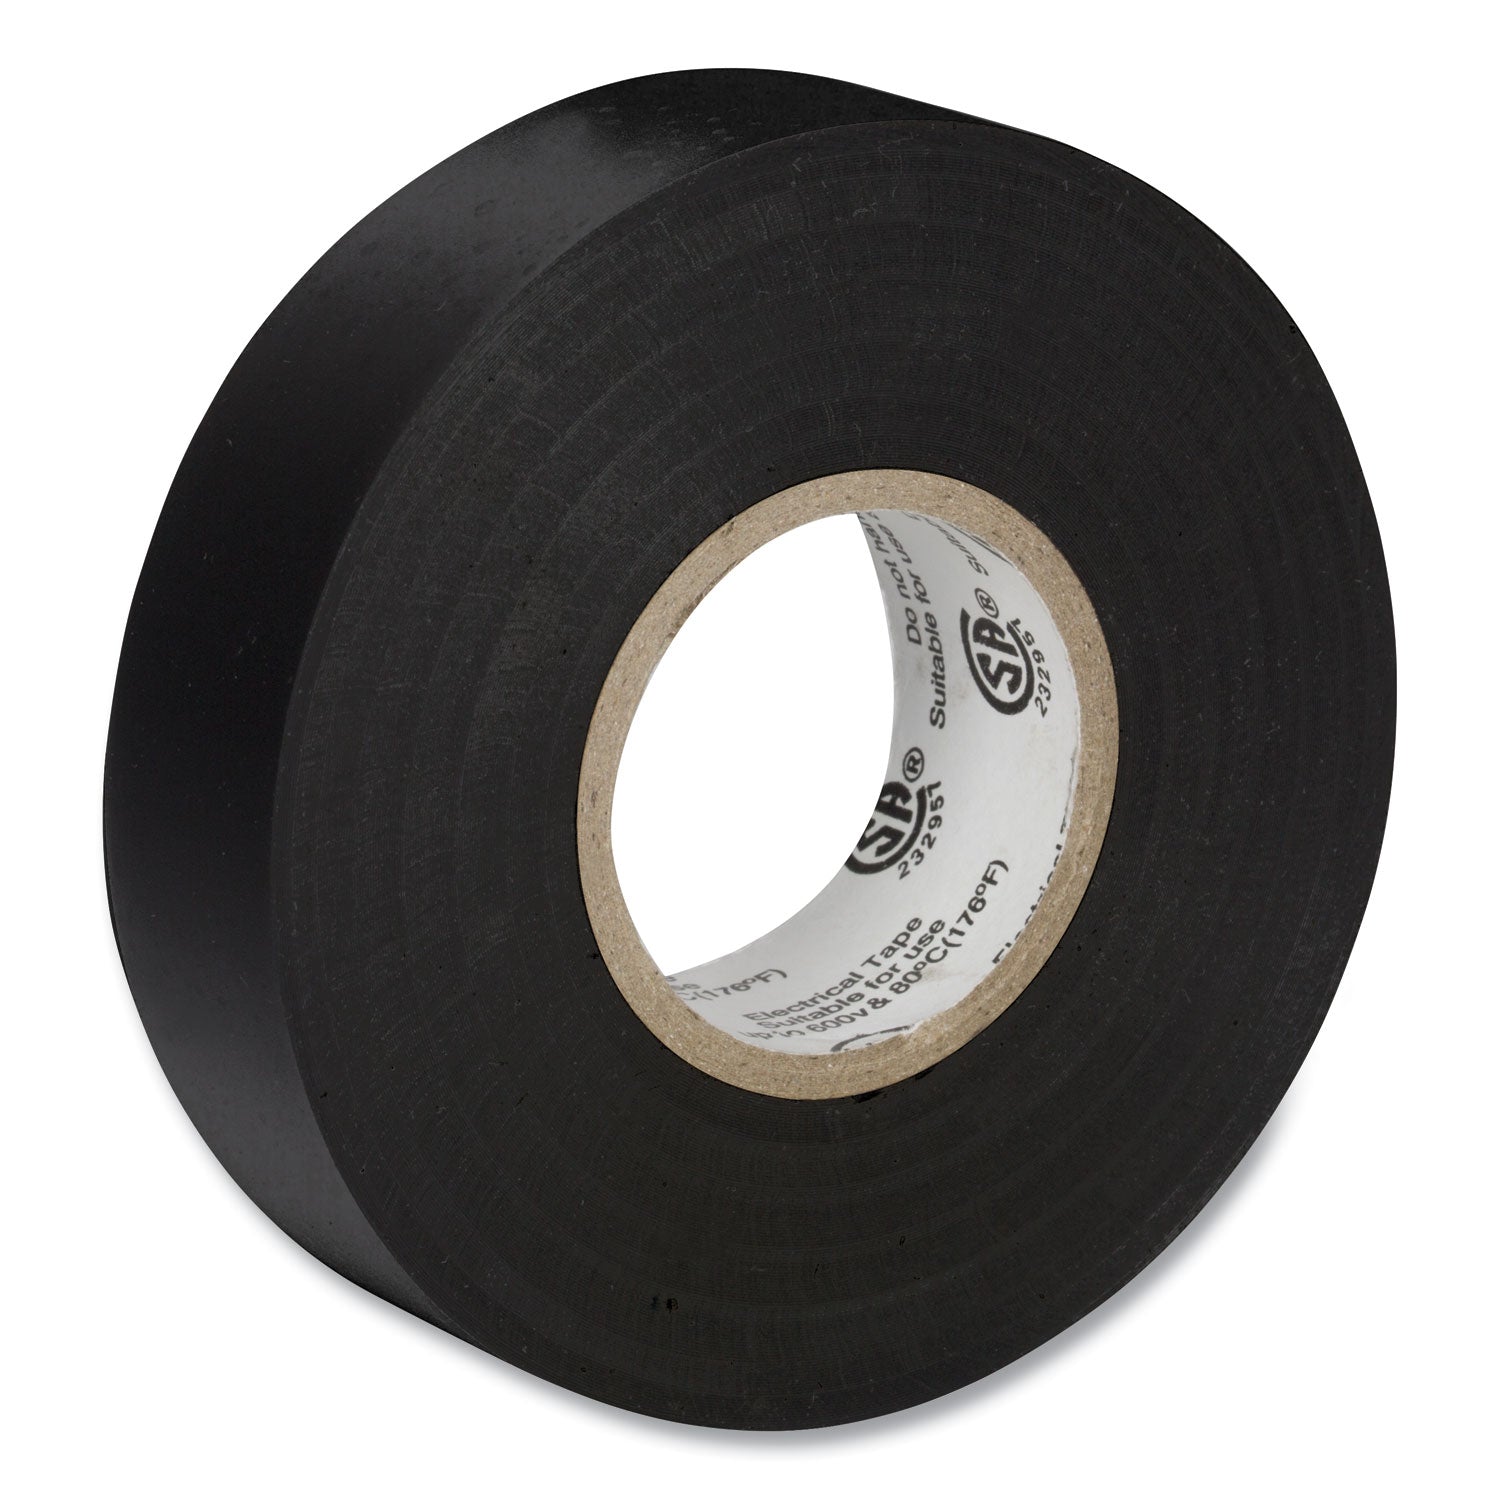 Pro Electrical Tape, 1" Core, 0.75" x 66 ft, Black - 